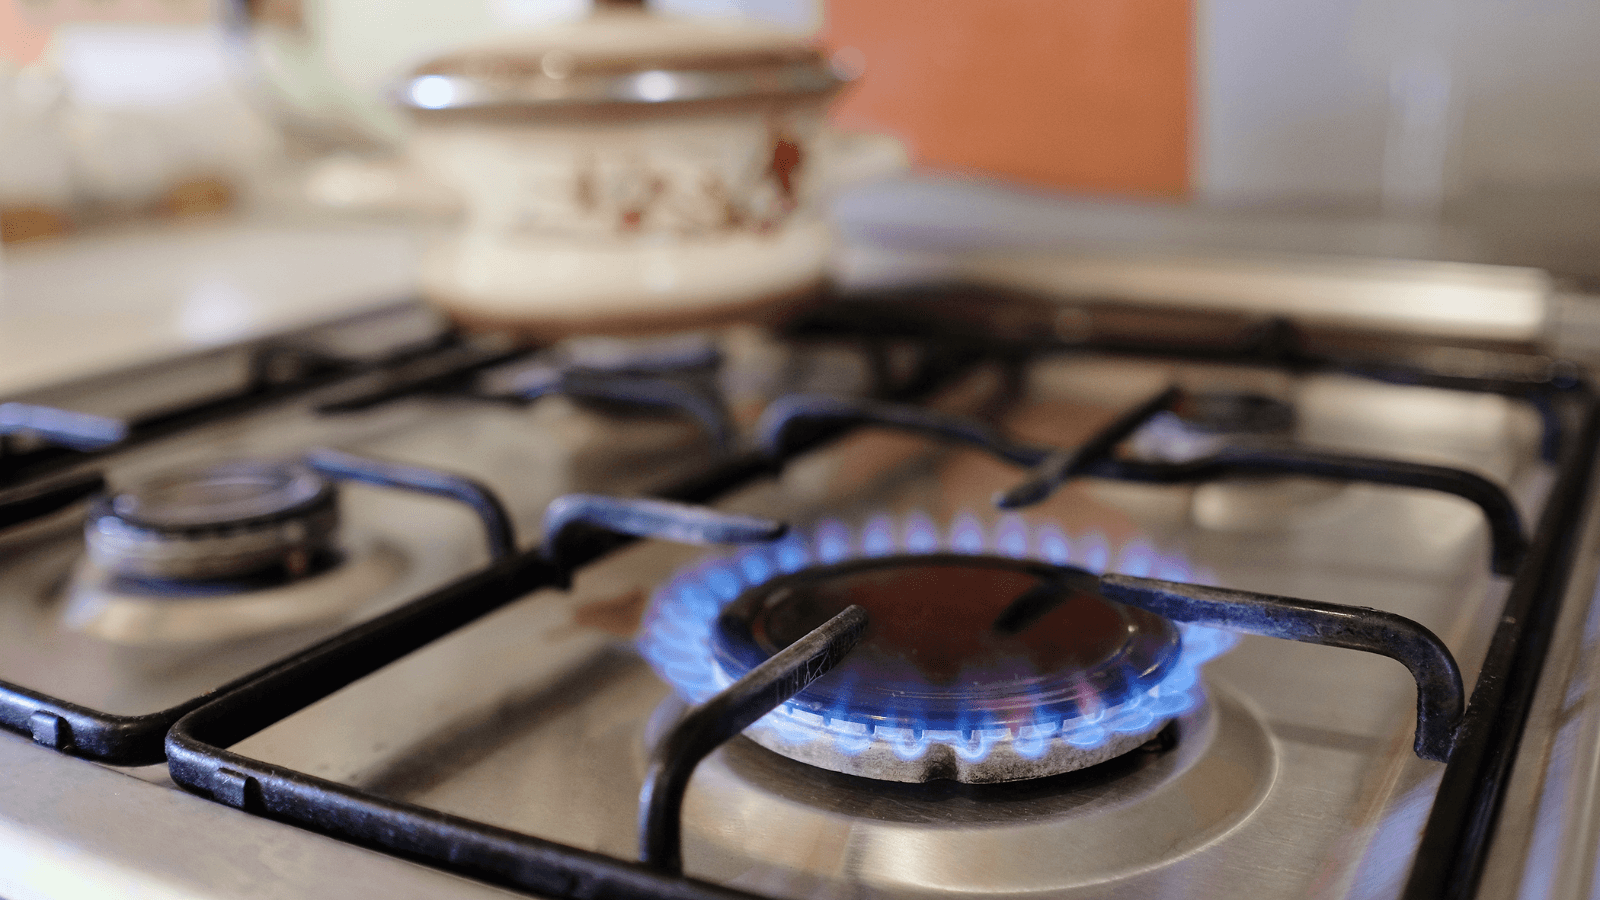 Why Should You Consider Swapping Out Your Gas Stove?